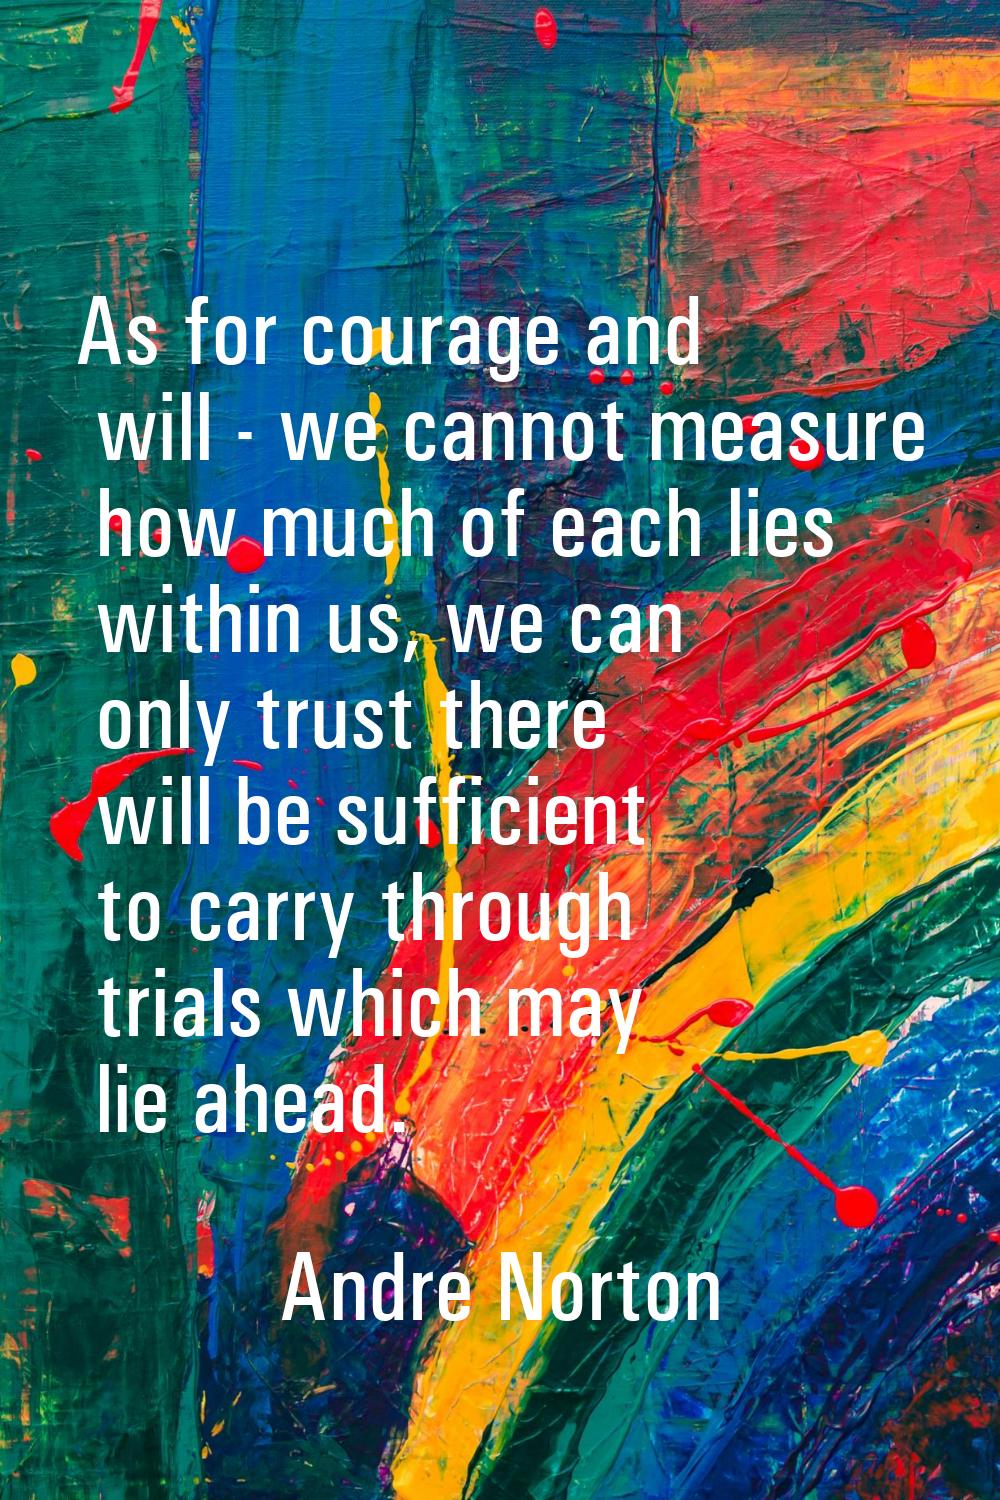 As for courage and will - we cannot measure how much of each lies within us, we can only trust ther